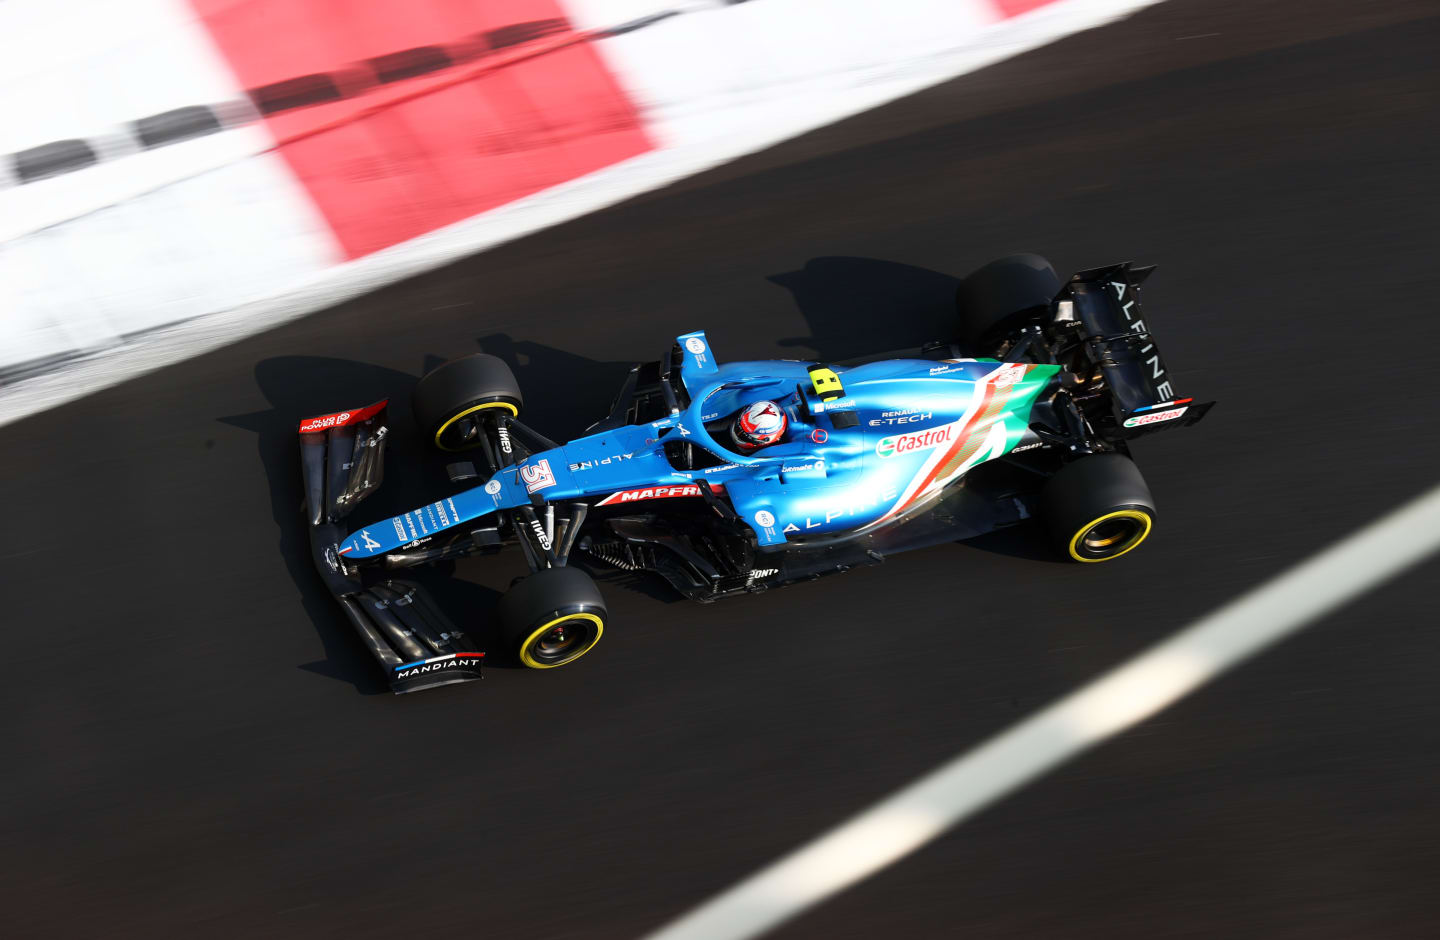 ABU DHABI, UNITED ARAB EMIRATES - DECEMBER 11: Esteban Ocon of France driving the (31) Alpine A521 Renault during final practice ahead of the F1 Grand Prix of Abu Dhabi at Yas Marina Circuit on December 11, 2021 in Abu Dhabi, United Arab Emirates. (Photo by Clive Rose/Getty Images)